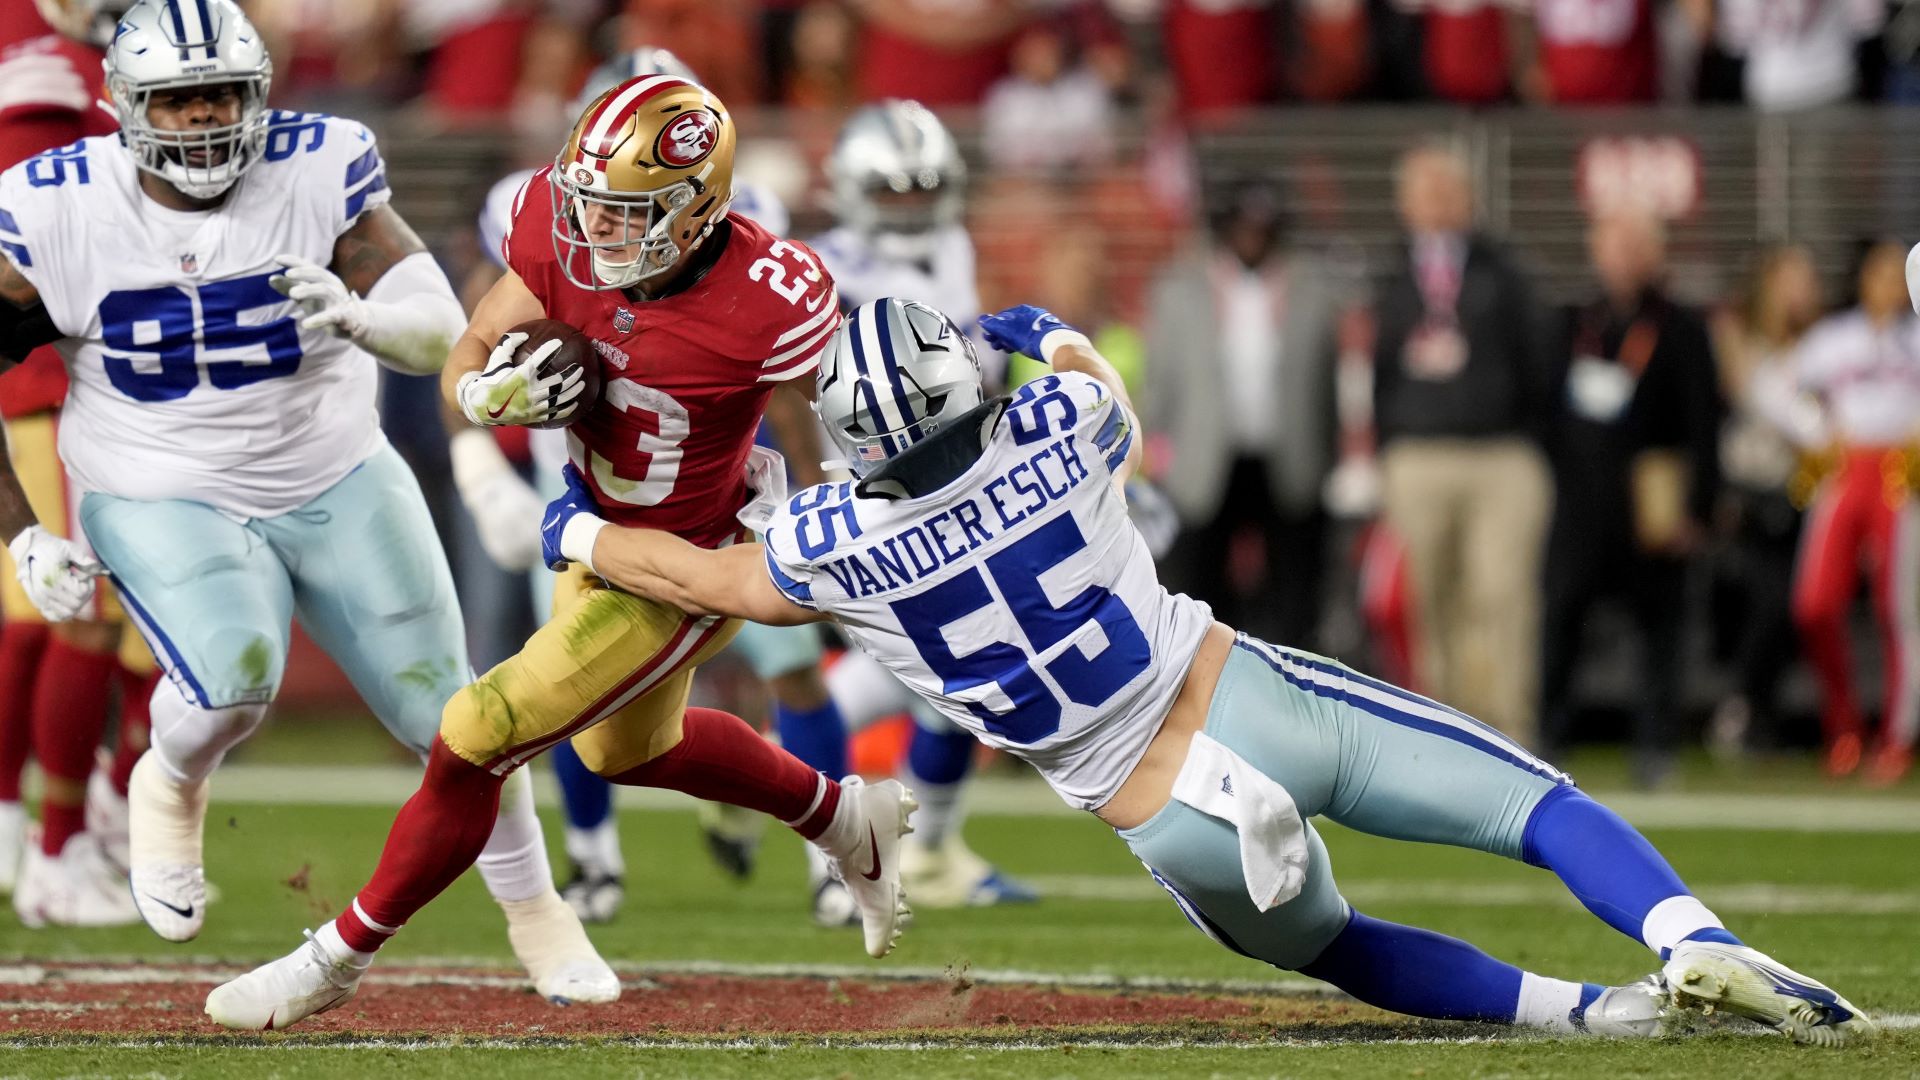 Cowboys vs 49ers live stream: How to watch Divisional game of the